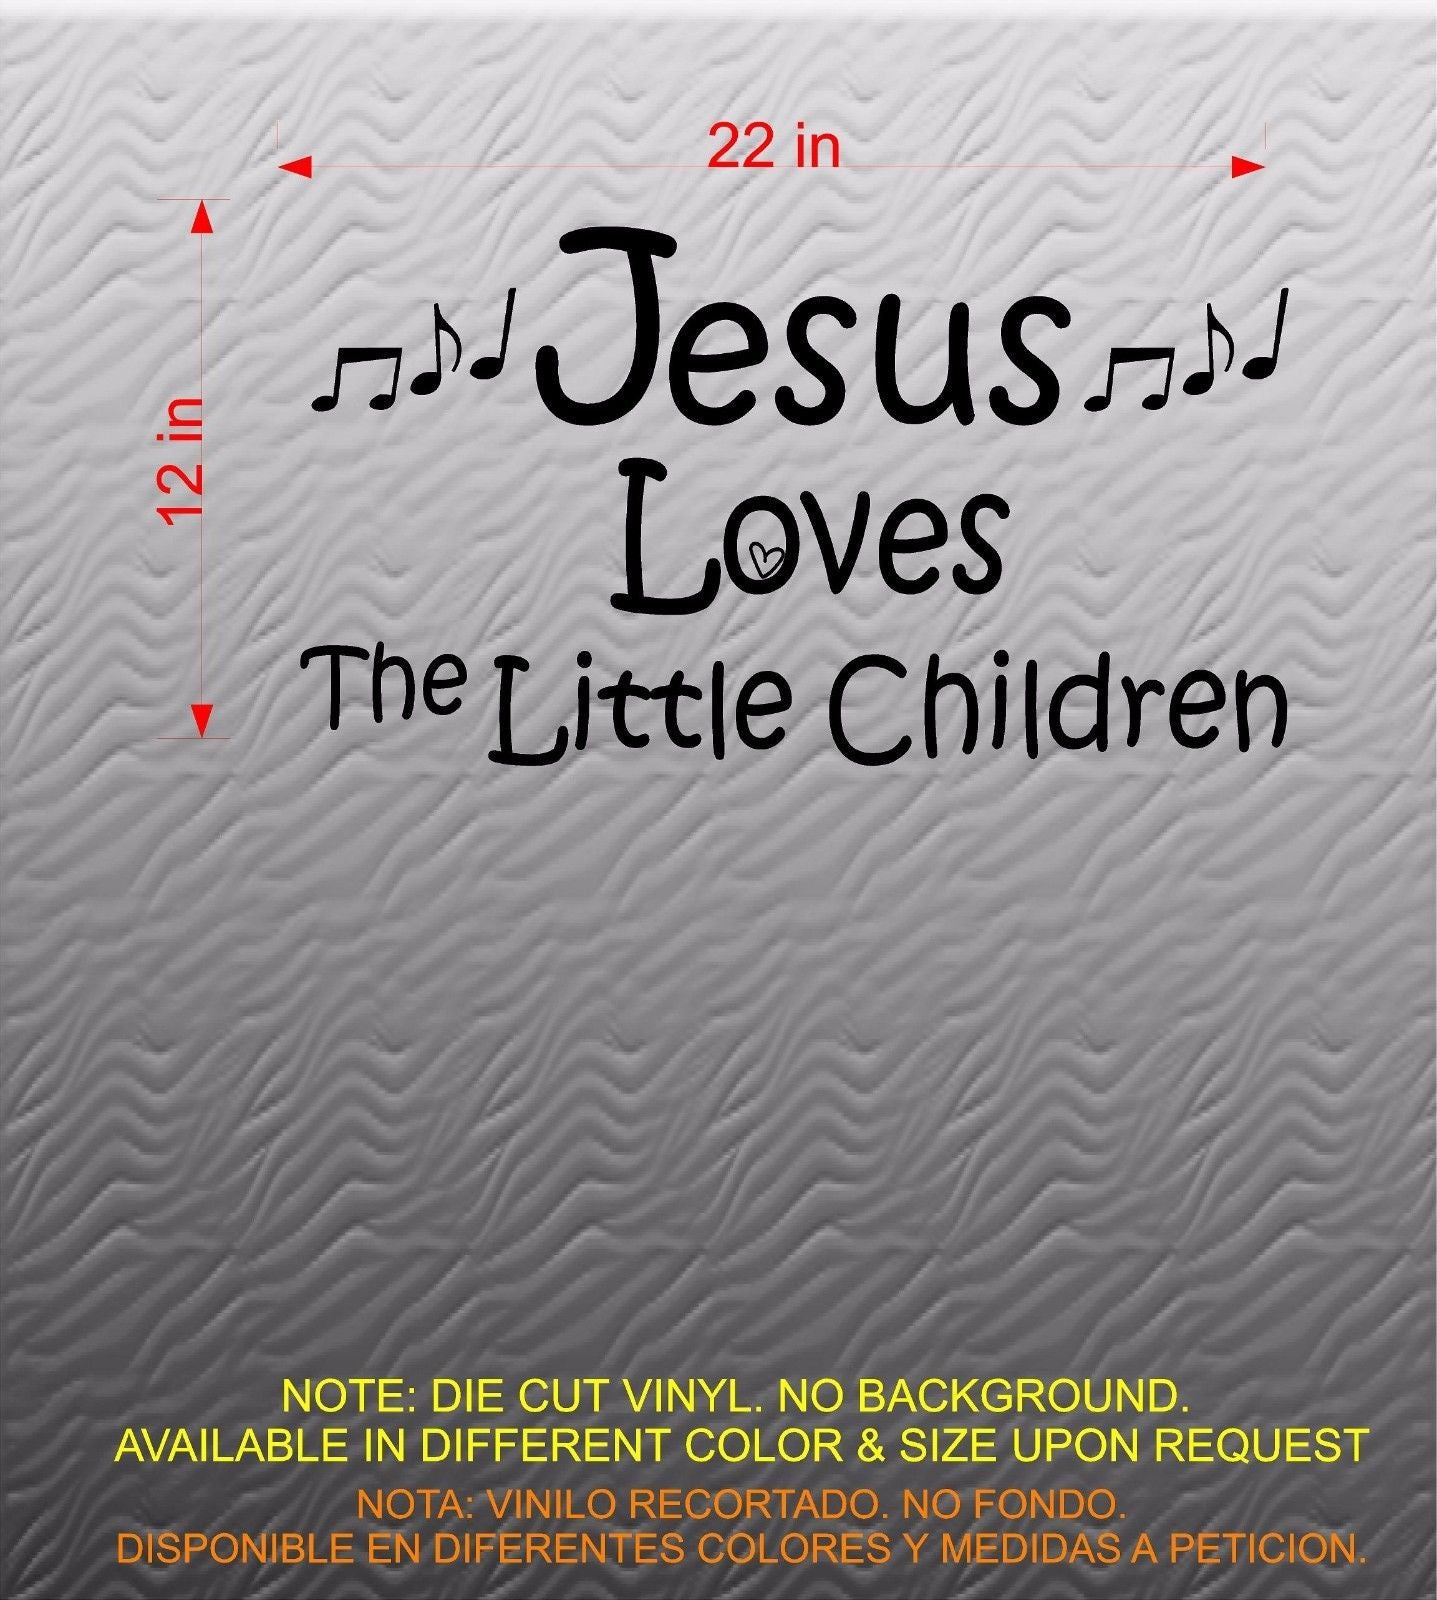 Stickers. Vinyl Wall Decal. Inspiration. Jesus Loves The Little Children.  Music Notes.